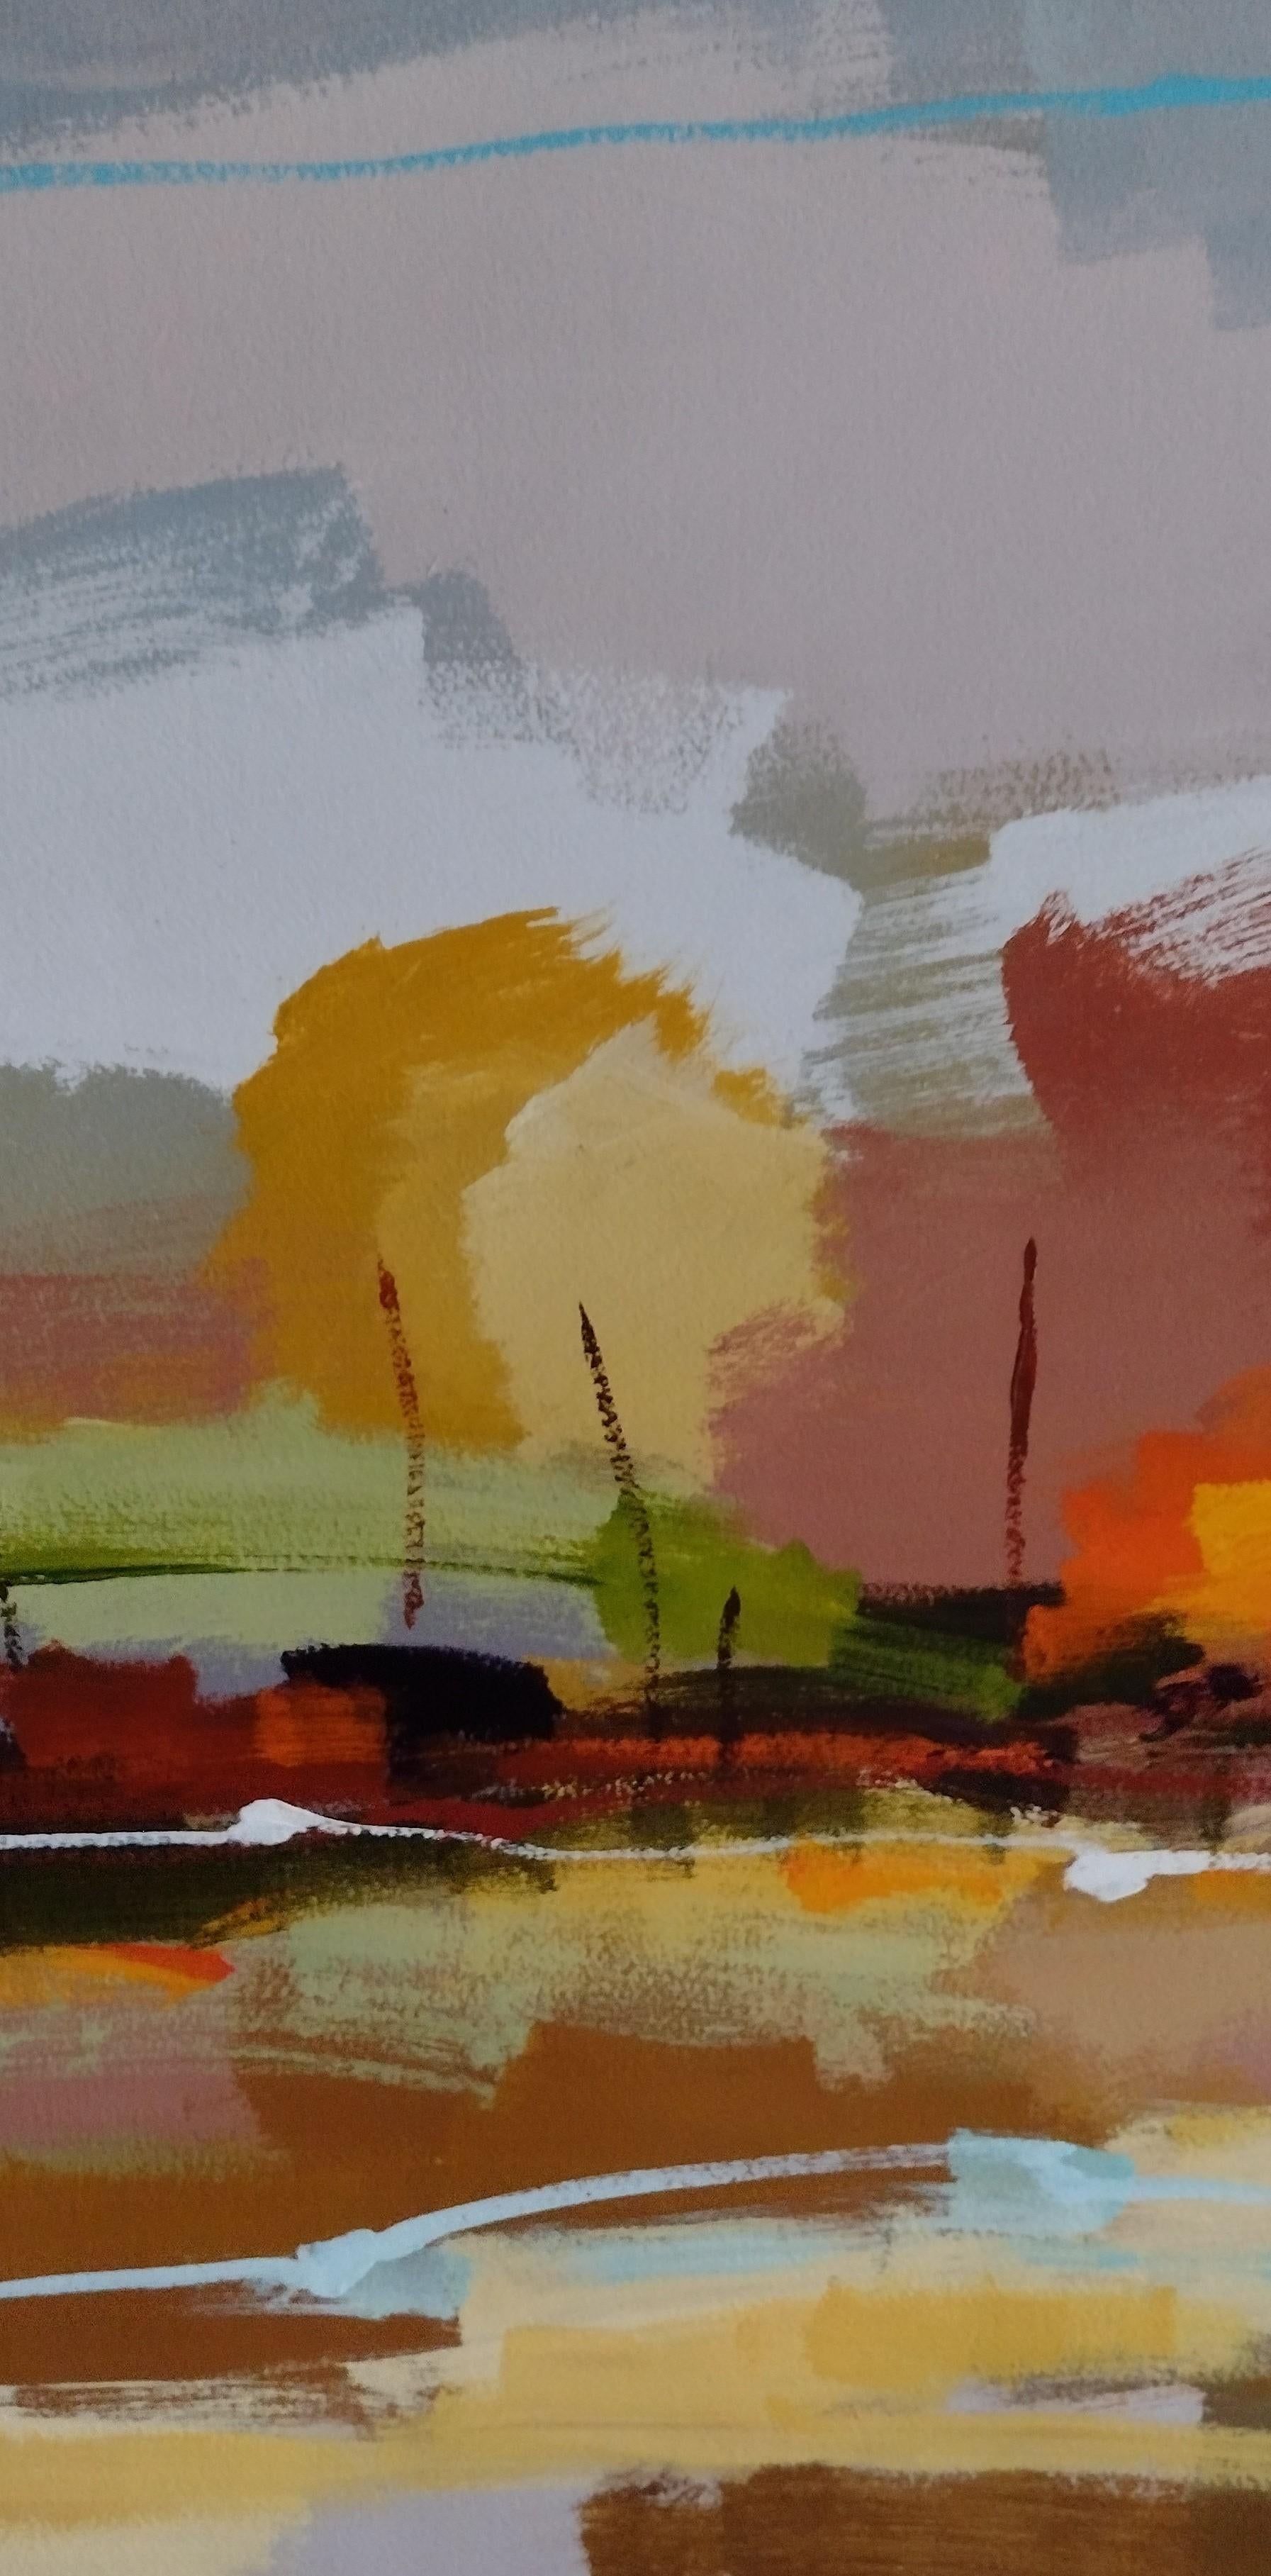 Collective Fondness II - Original Acrylic Landscape on Paper - Contemporary Painting by Lun Tse 